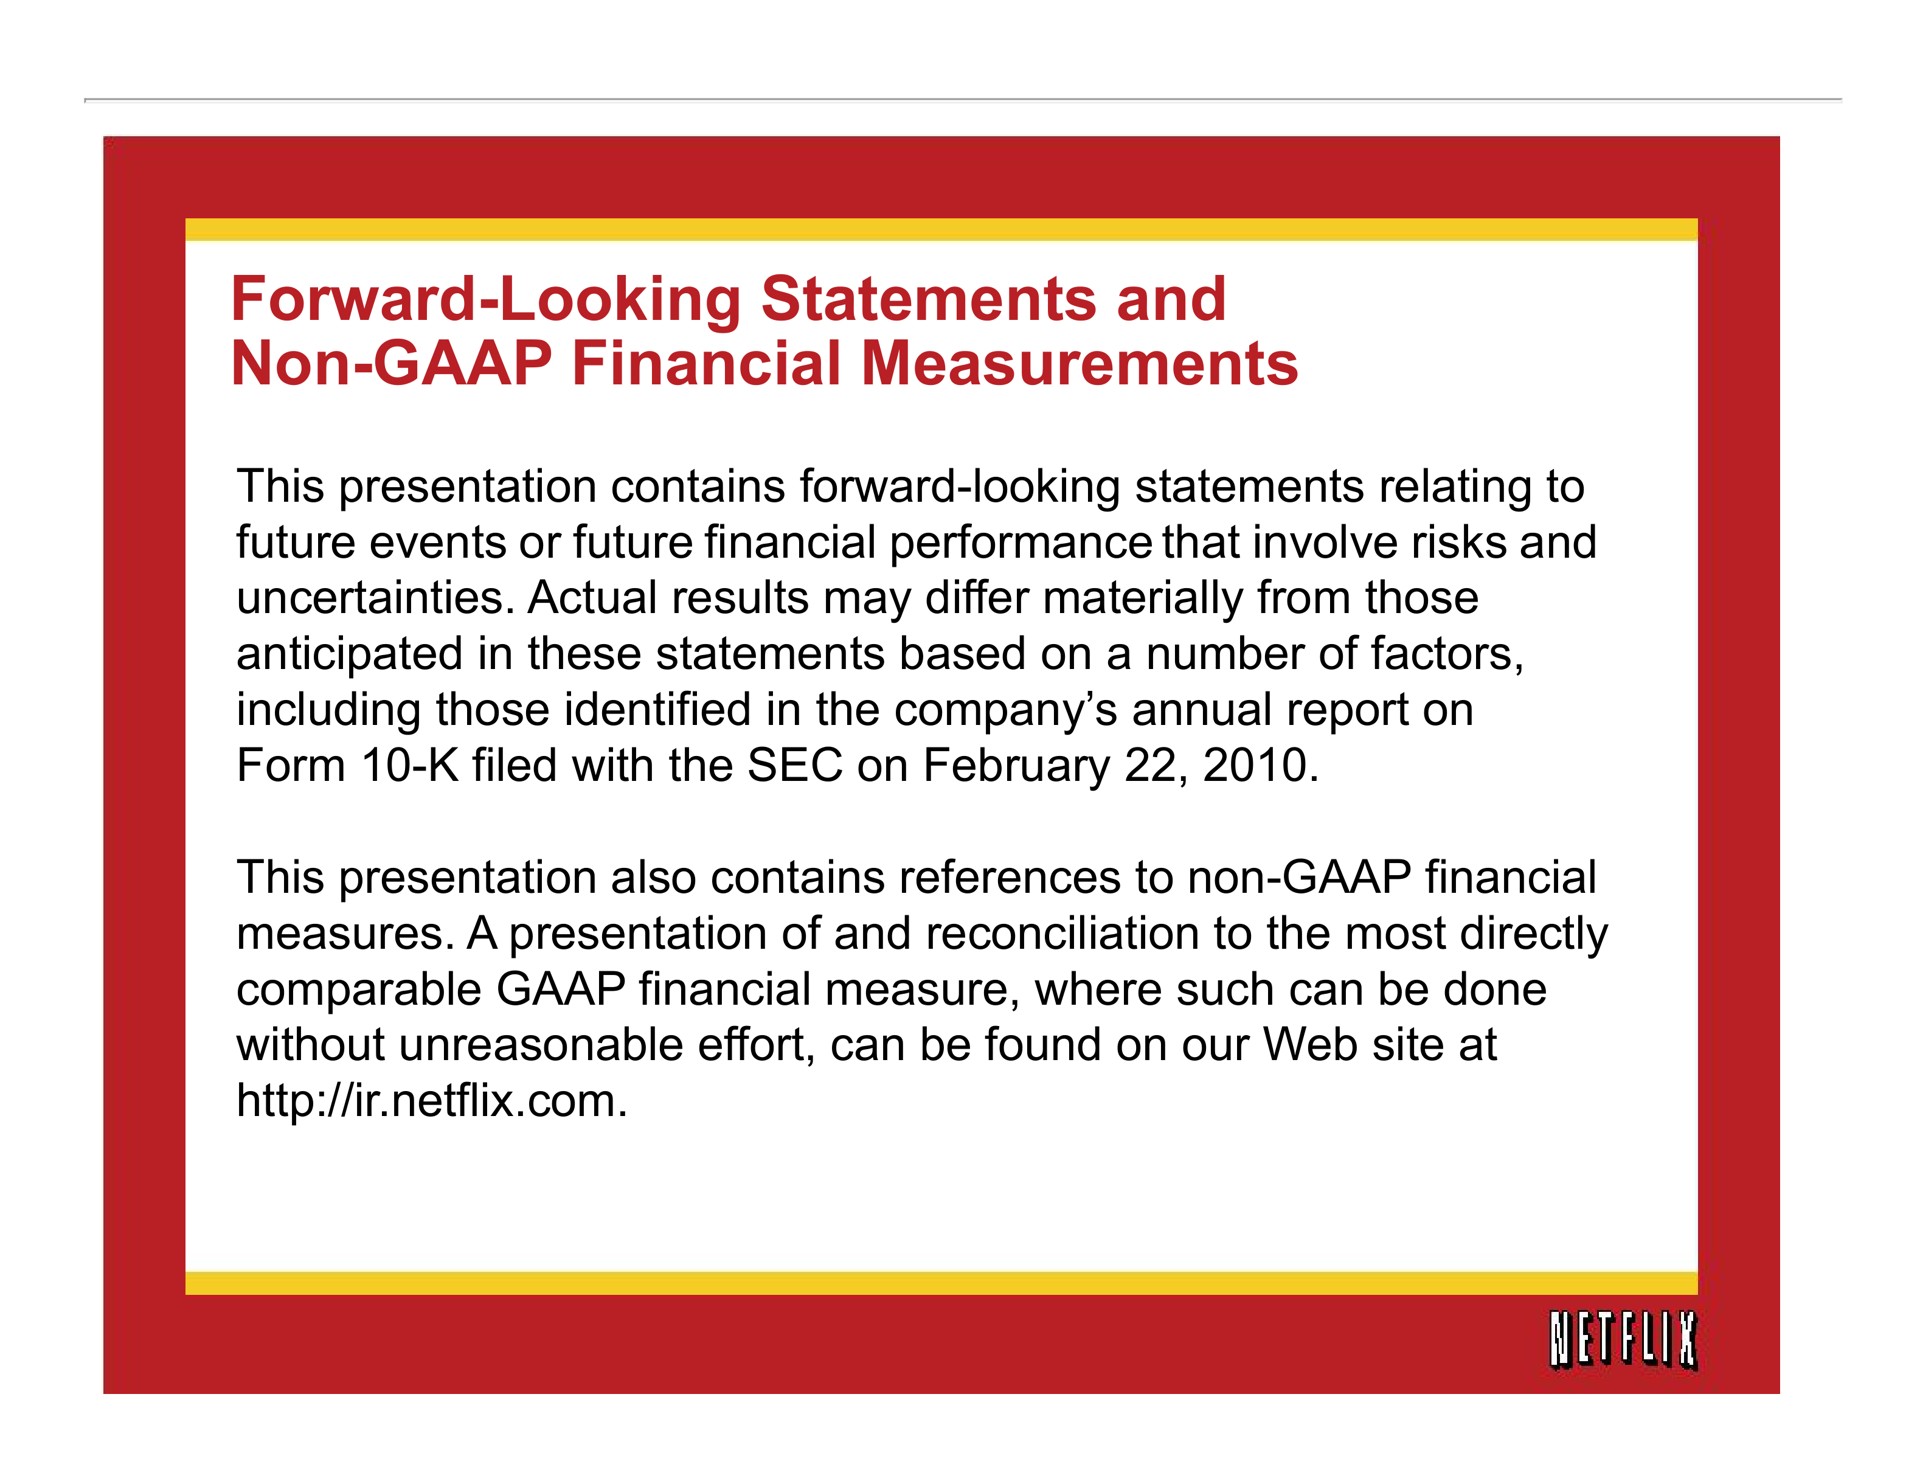 forward looking statements and non financial measurements | Netflix